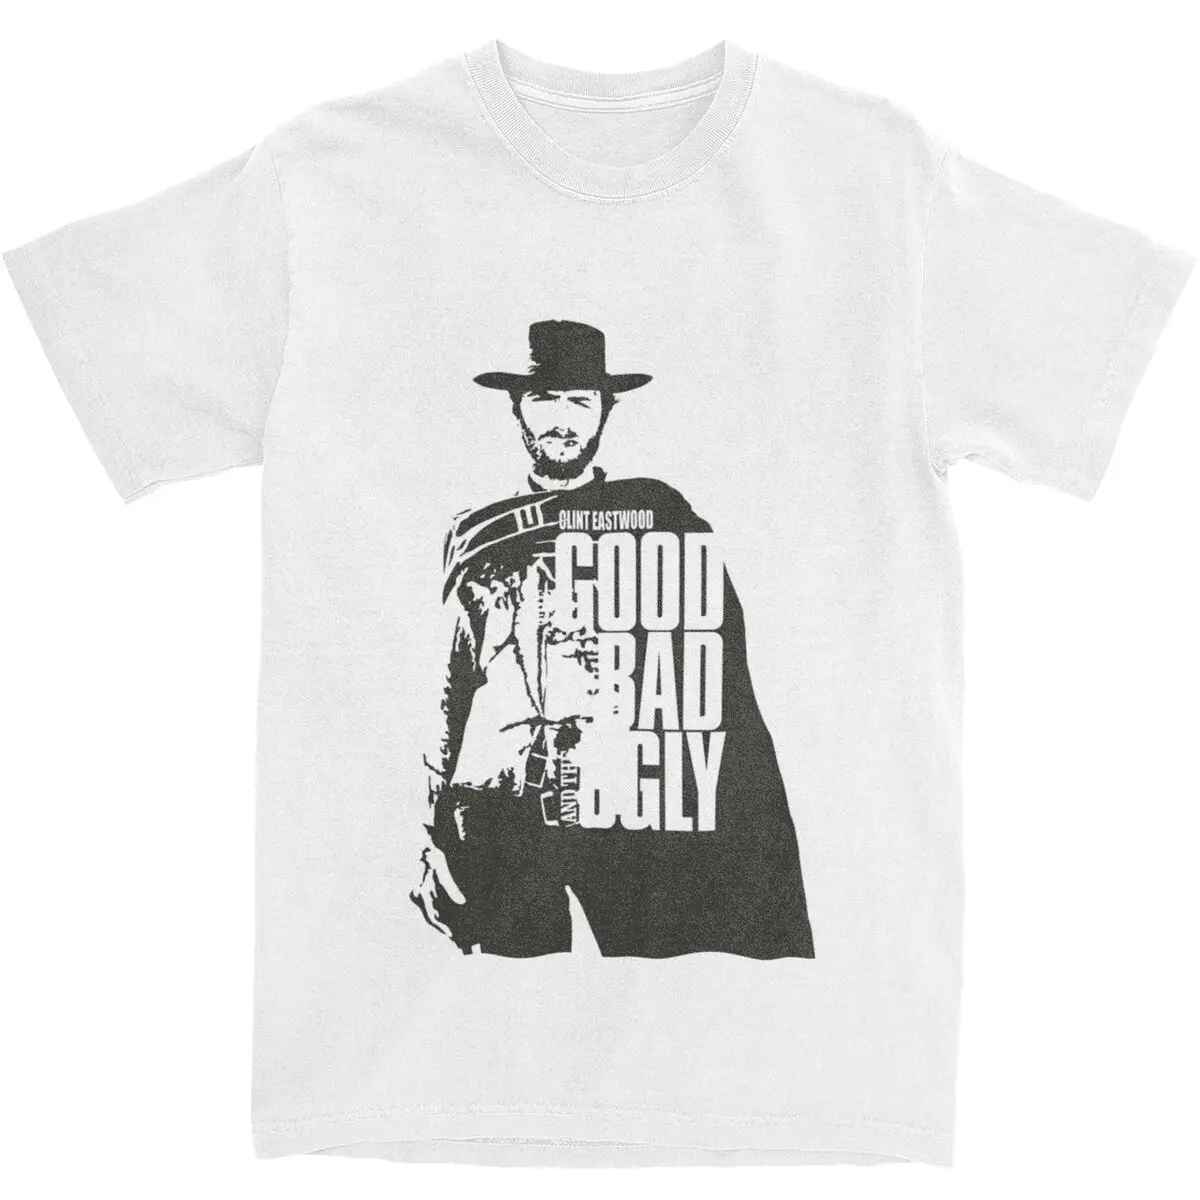 

Clint Eastwood T Shirt Men The Good The Bad The Ugly Vintage Cotton T Shirts Beach O-Neck Popular Tee Shirt Print Oversize Tops